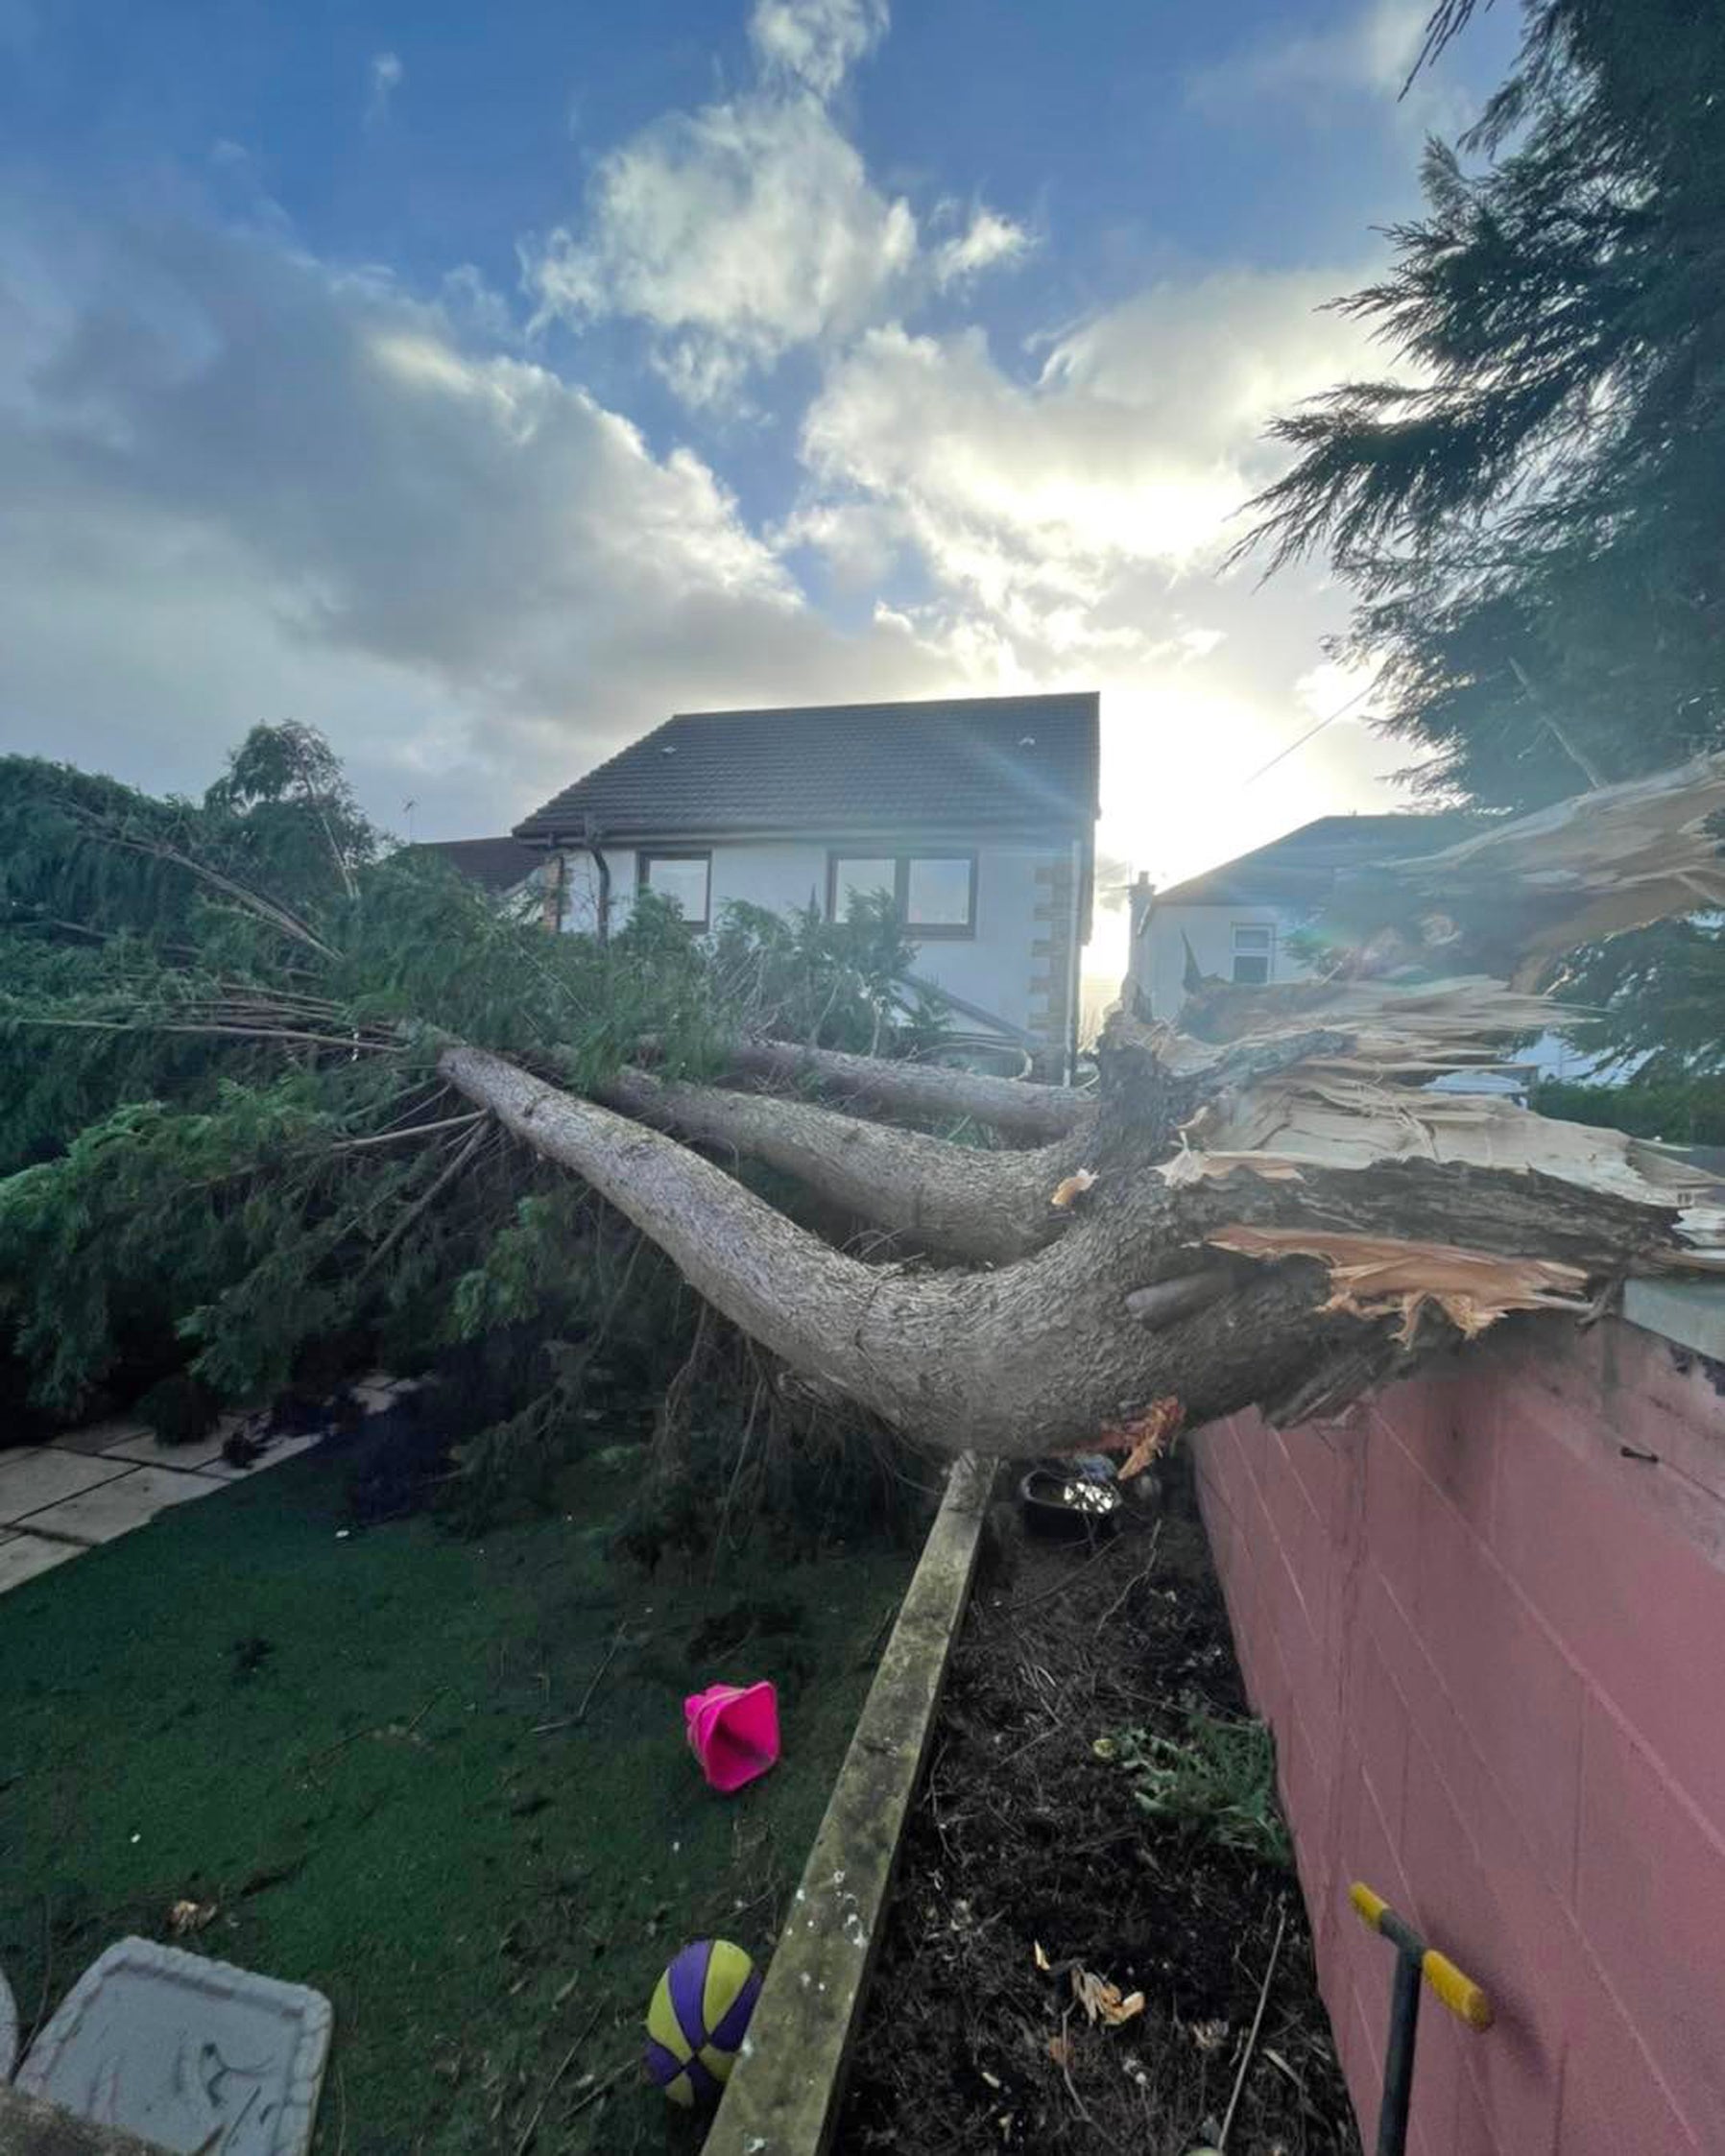 Homes across northern parts of the UK have been affected by the strong winds (Gregor Fulton)